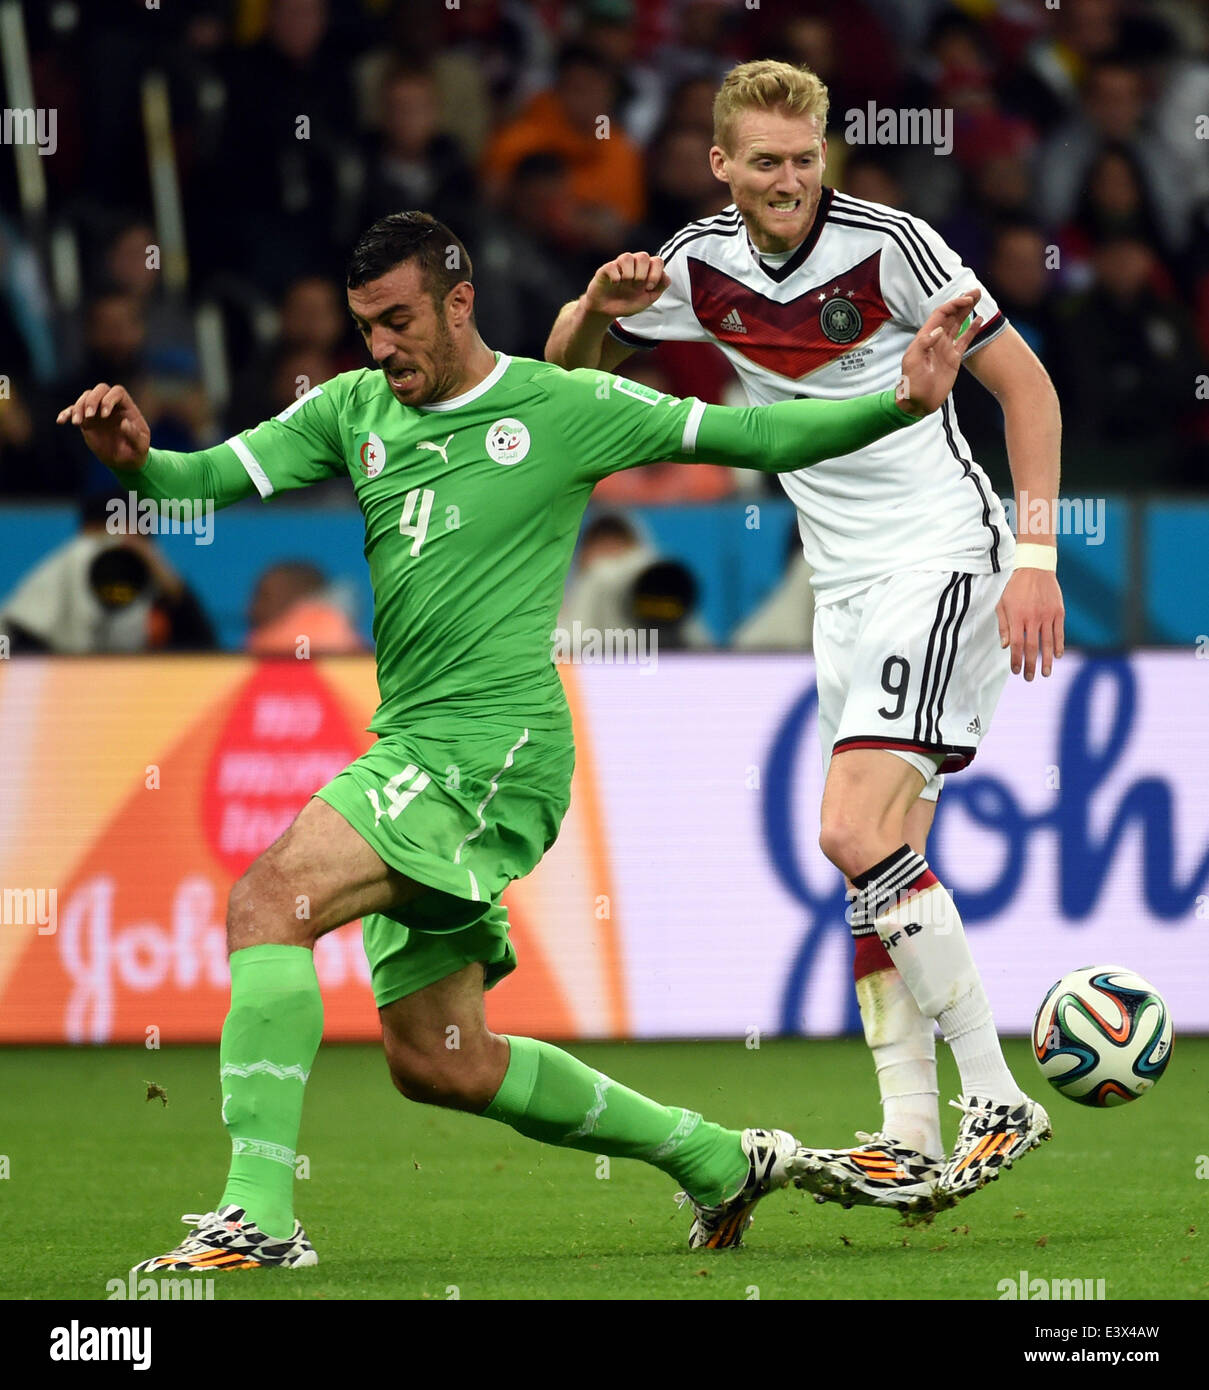 Porto Alegre, Brazil. 30th June, 2014. Algeria's Essaid Belkalem (L) vies with Germany's Andre Schurrle during a Round of 16 match between Germany and Algeria of 2014 FIFA World Cup at the Estadio Beira-Rio Stadium in Porto Alegre, Brazil, on June 30, 2014. Germany won 2-1 over Algeria after 120 minutes and qualified for quarter-finals on Monday. Credit:  Li Ga/Xinhua/Alamy Live News Stock Photo